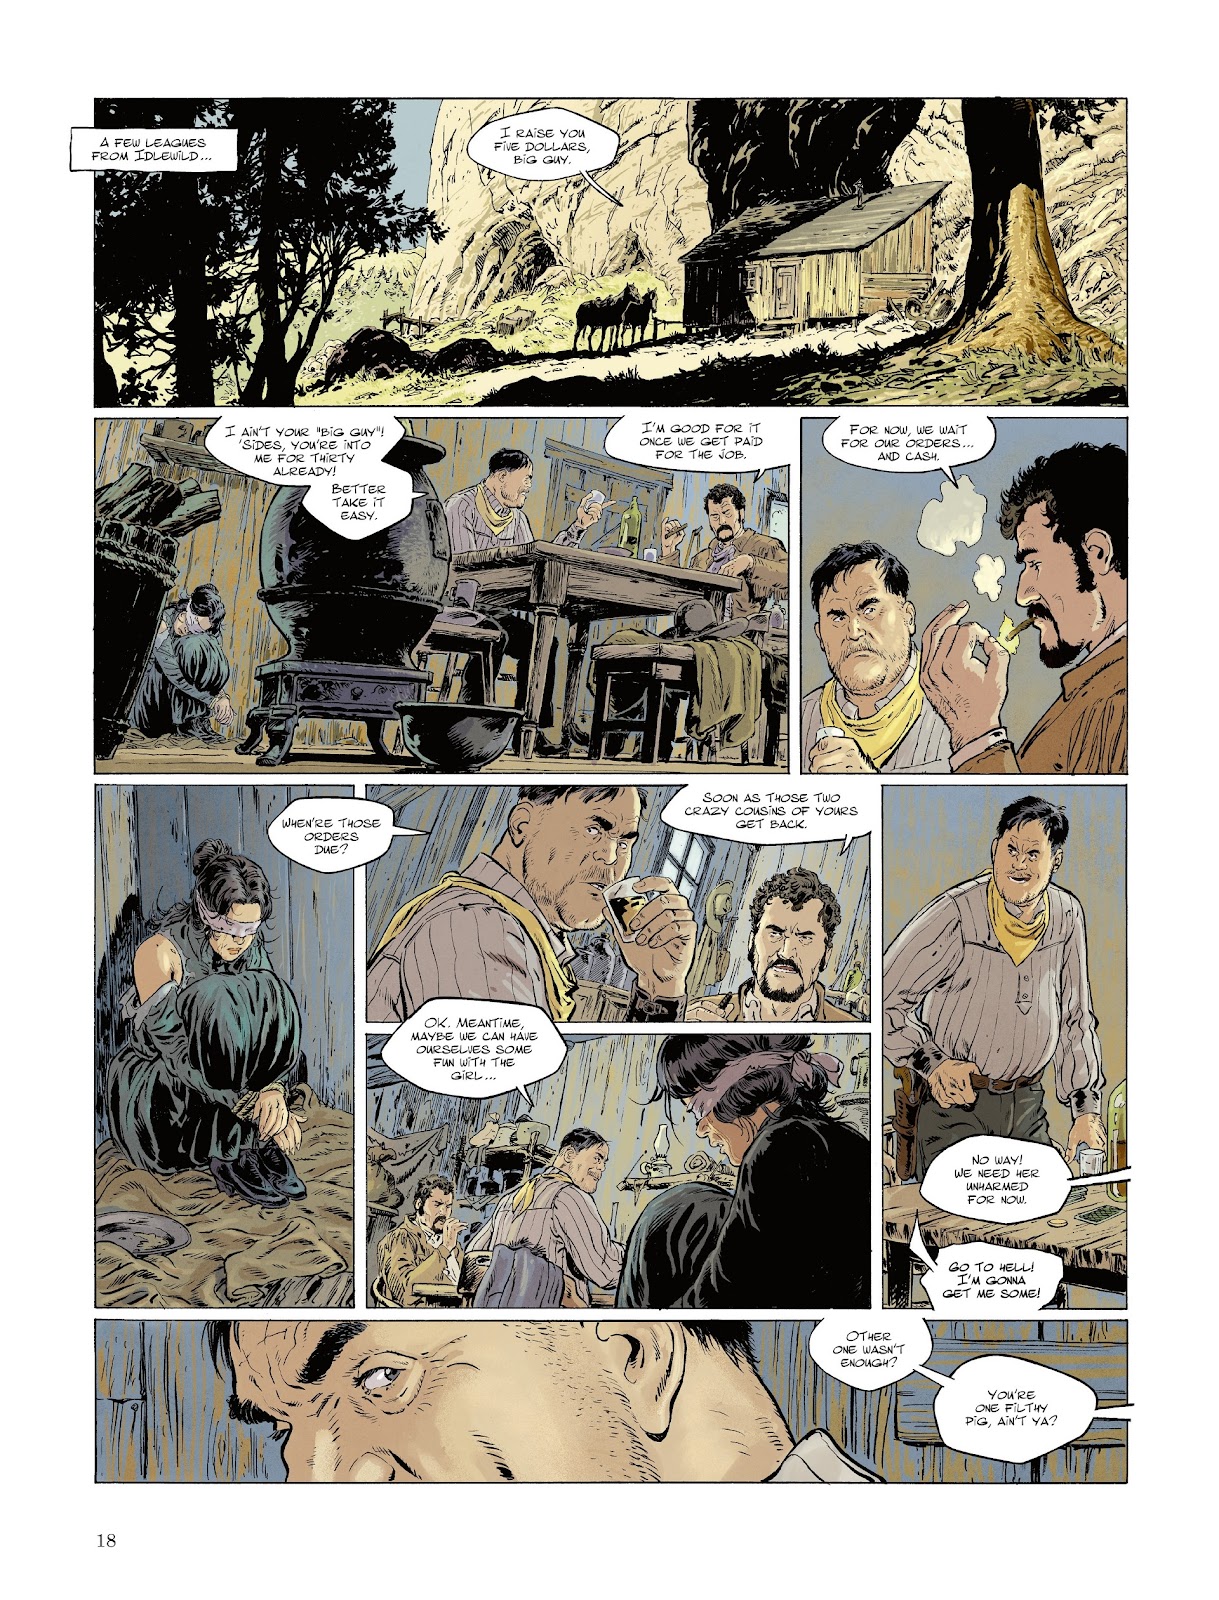 The Tiger Awakens: The Return of John Chinaman issue 1 - Page 19